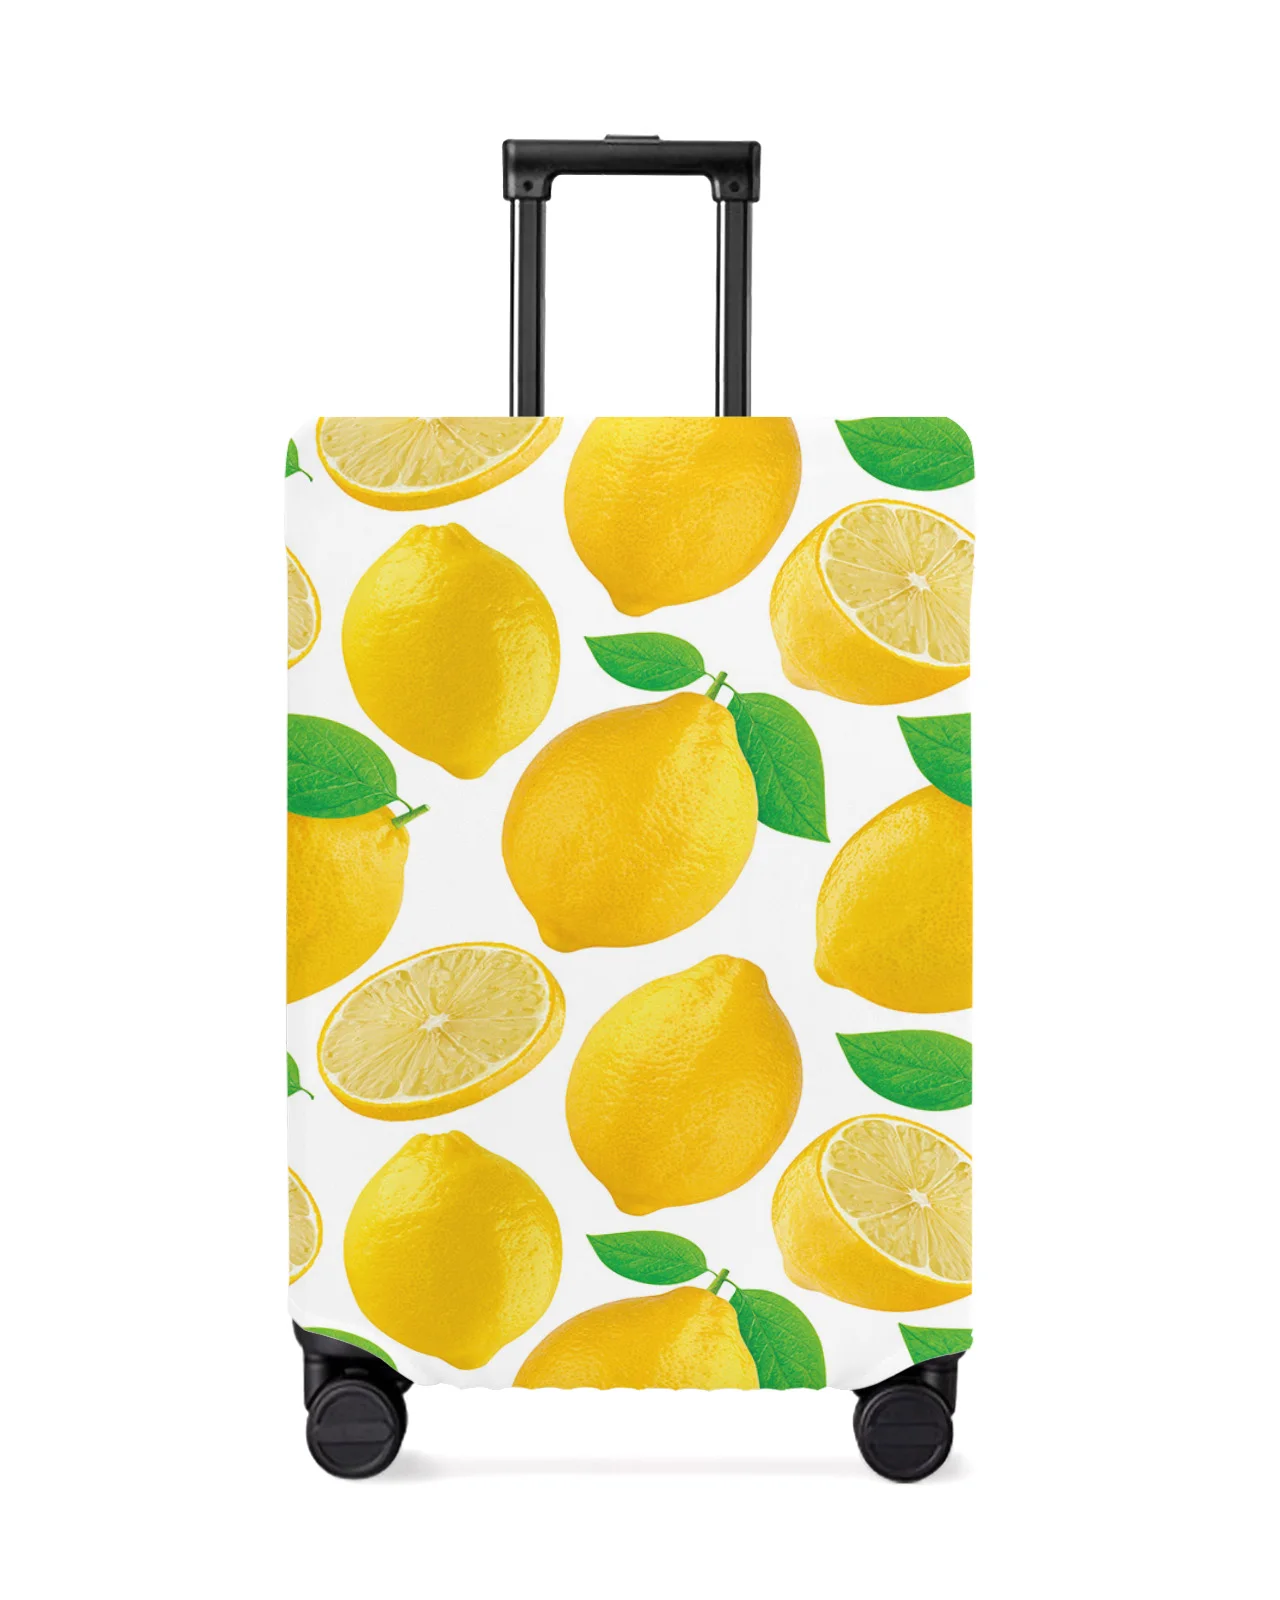 

Fruit Lemon Travel Luggage Cover Elastic Baggage Cover Suitable For 18-32 Inch Suitcase Case Dust Cover Travel Accessories